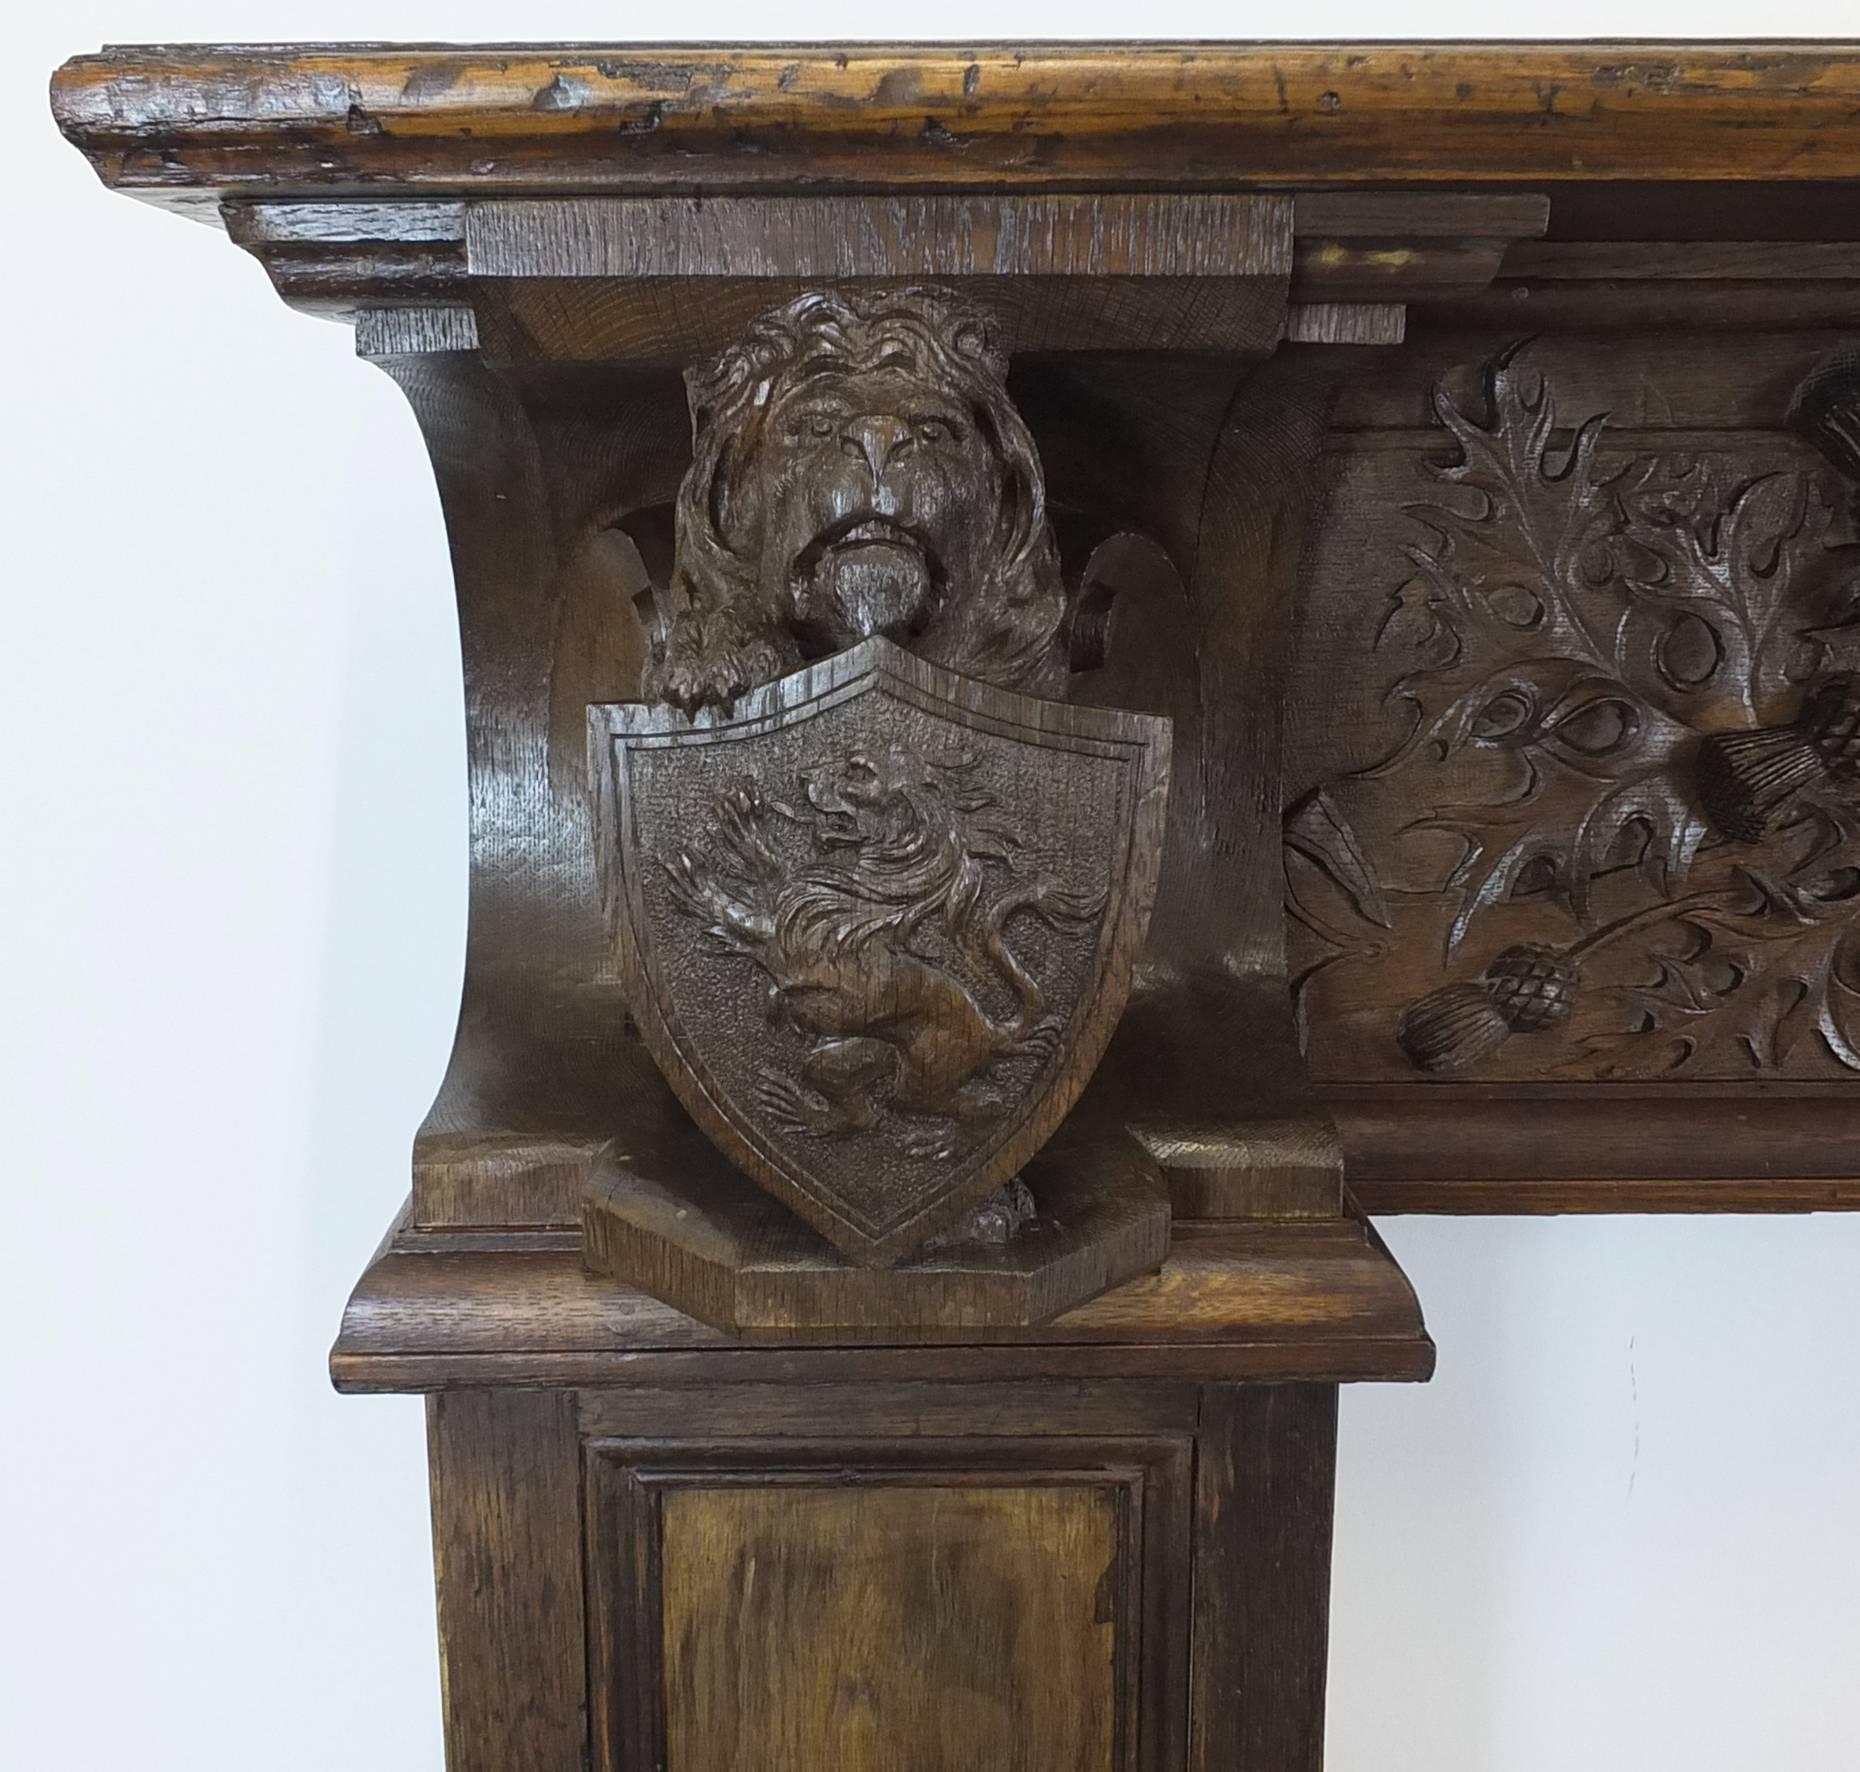 A large and historically important Scottish oak fireplace mantel. 

The main frieze panel is carved of a single piece of oak, rather than applied decoration, with elaborate thistle and foliage design and the Scottish motto ‘Nemo me impune